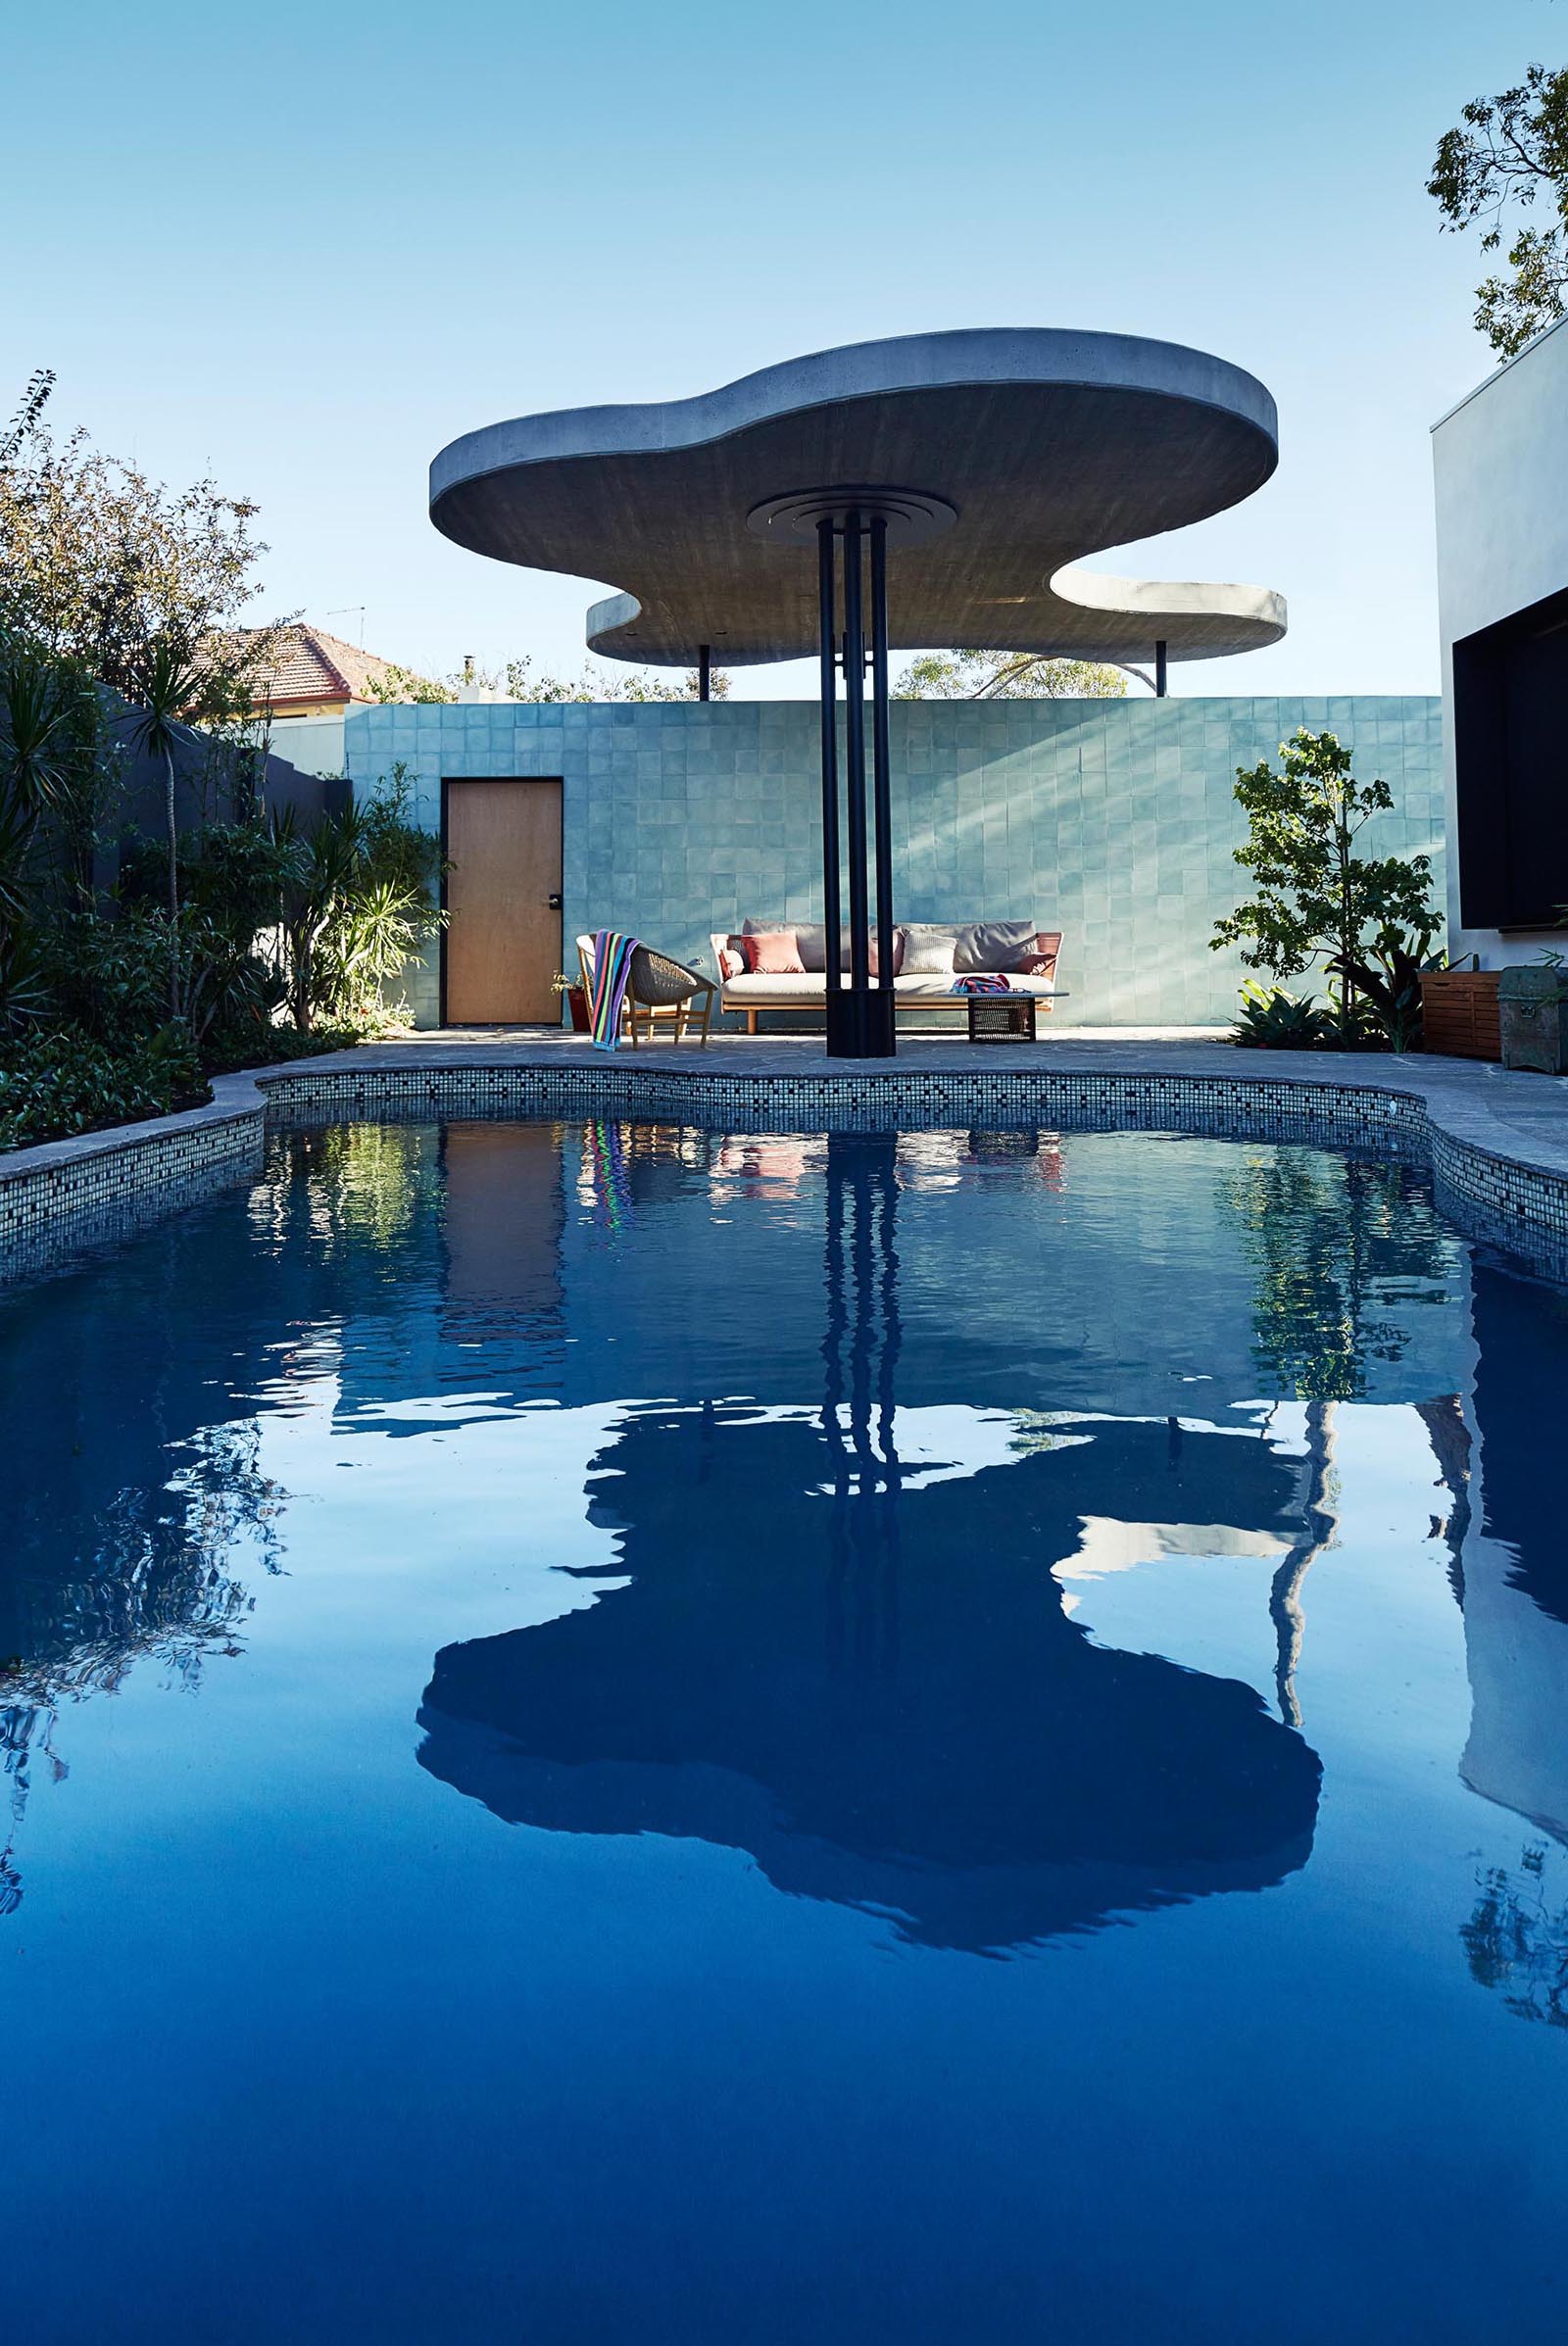 The organic shaped swimming pool of this modern home, is matched by the organic shape of the roof that provides shade to poolside furniture.